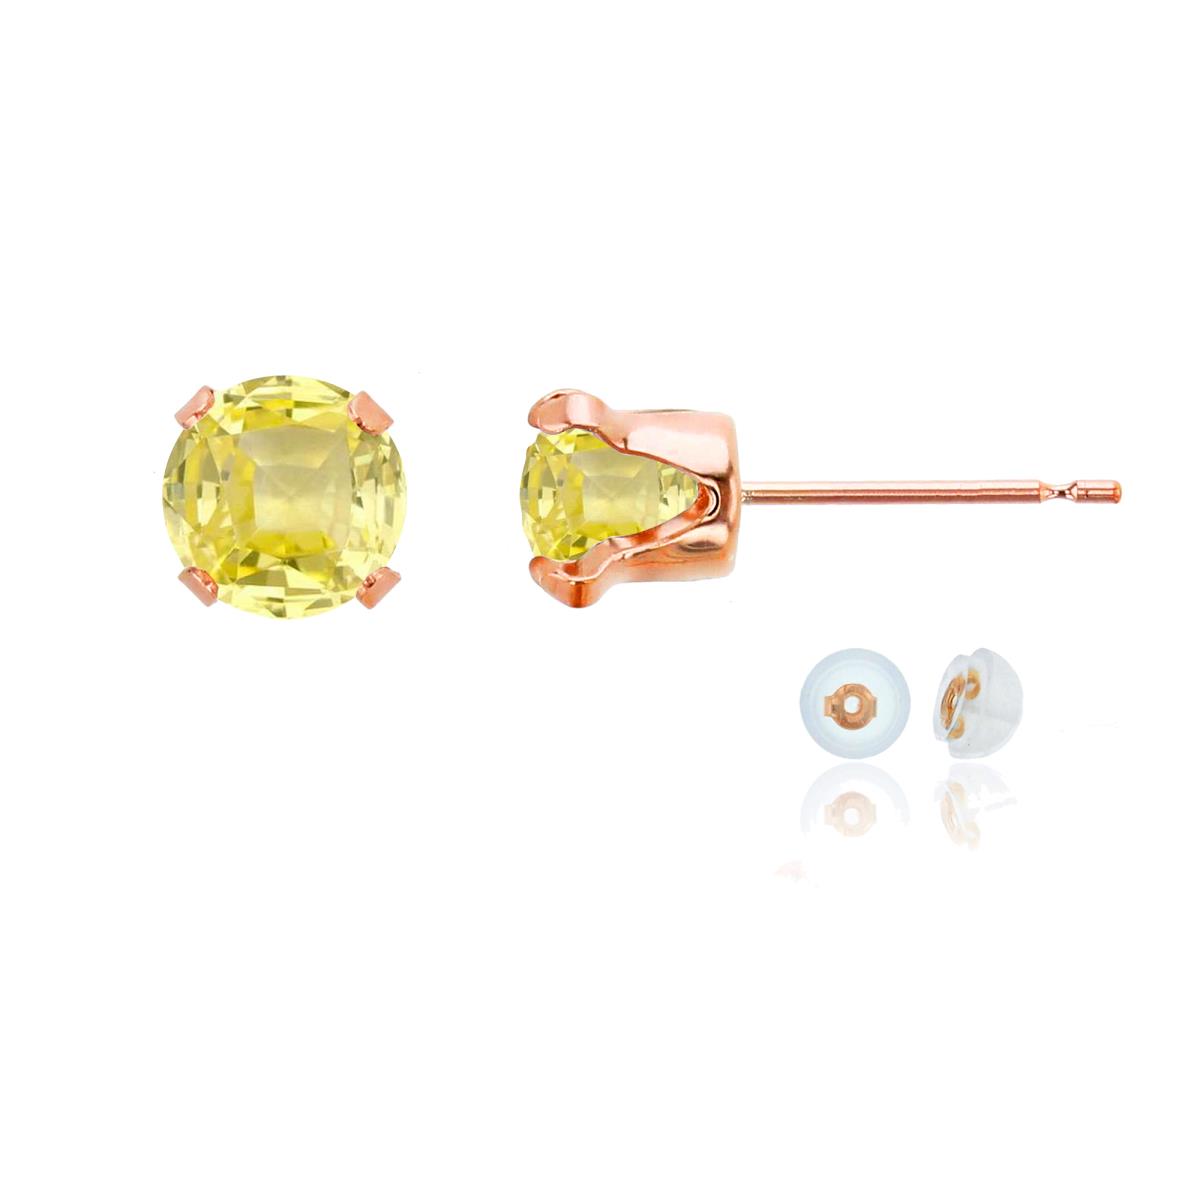 14K Rose Gold 6mm Round Cr Yellow Sapphire Stud Earring with Silicone Back